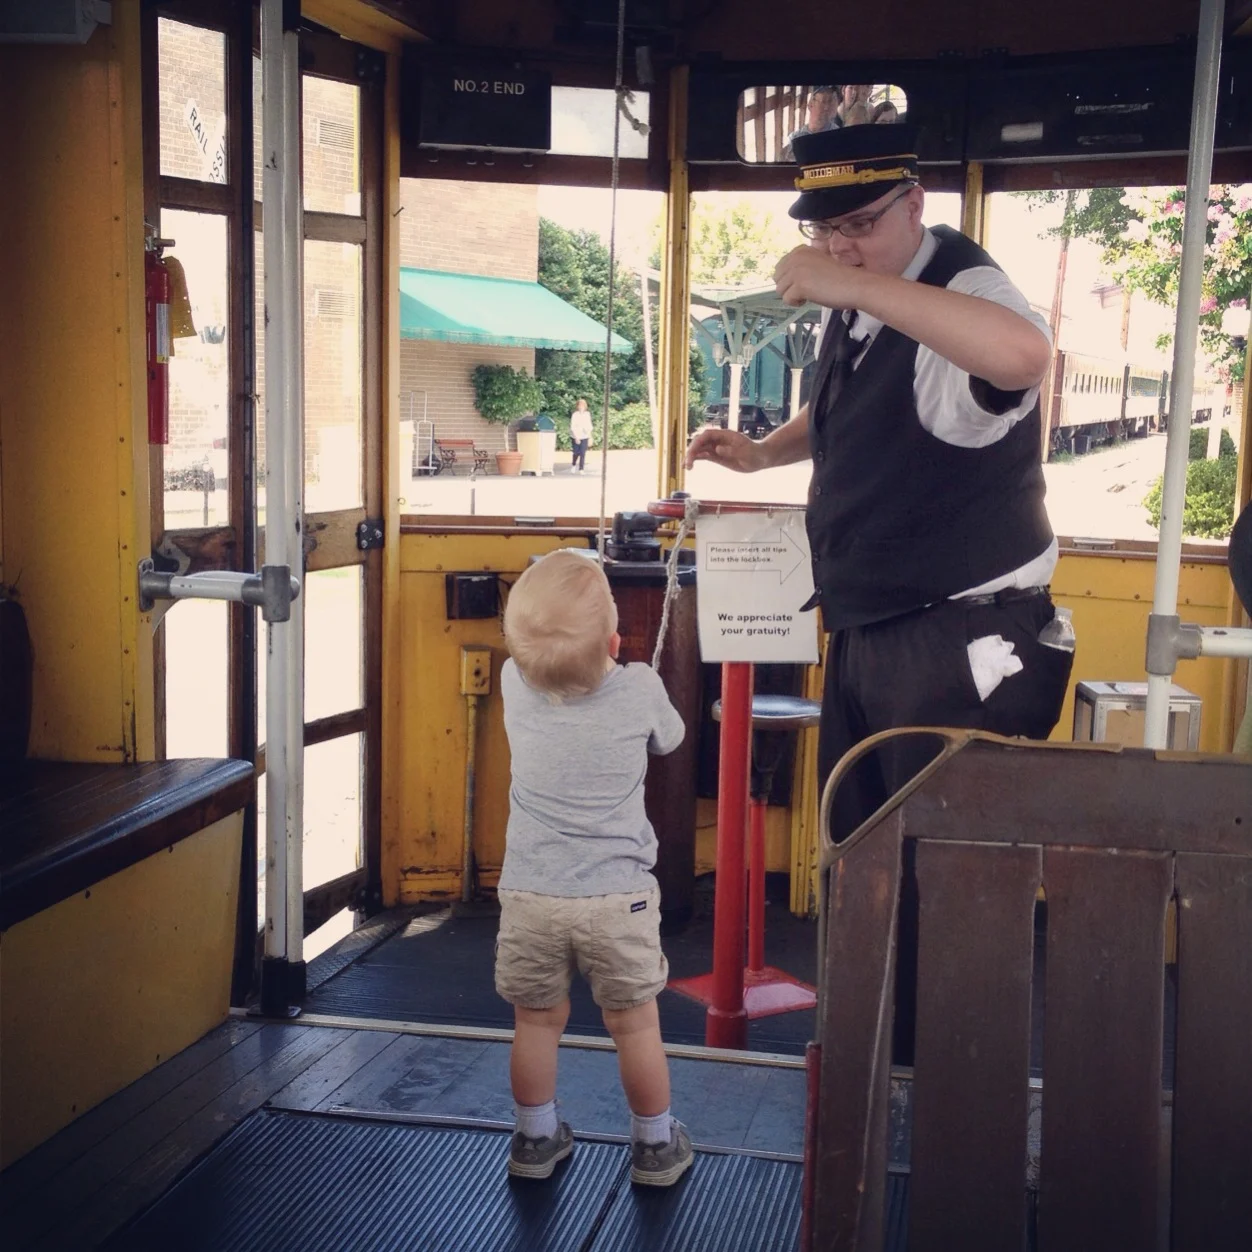 ringing the trolley bell